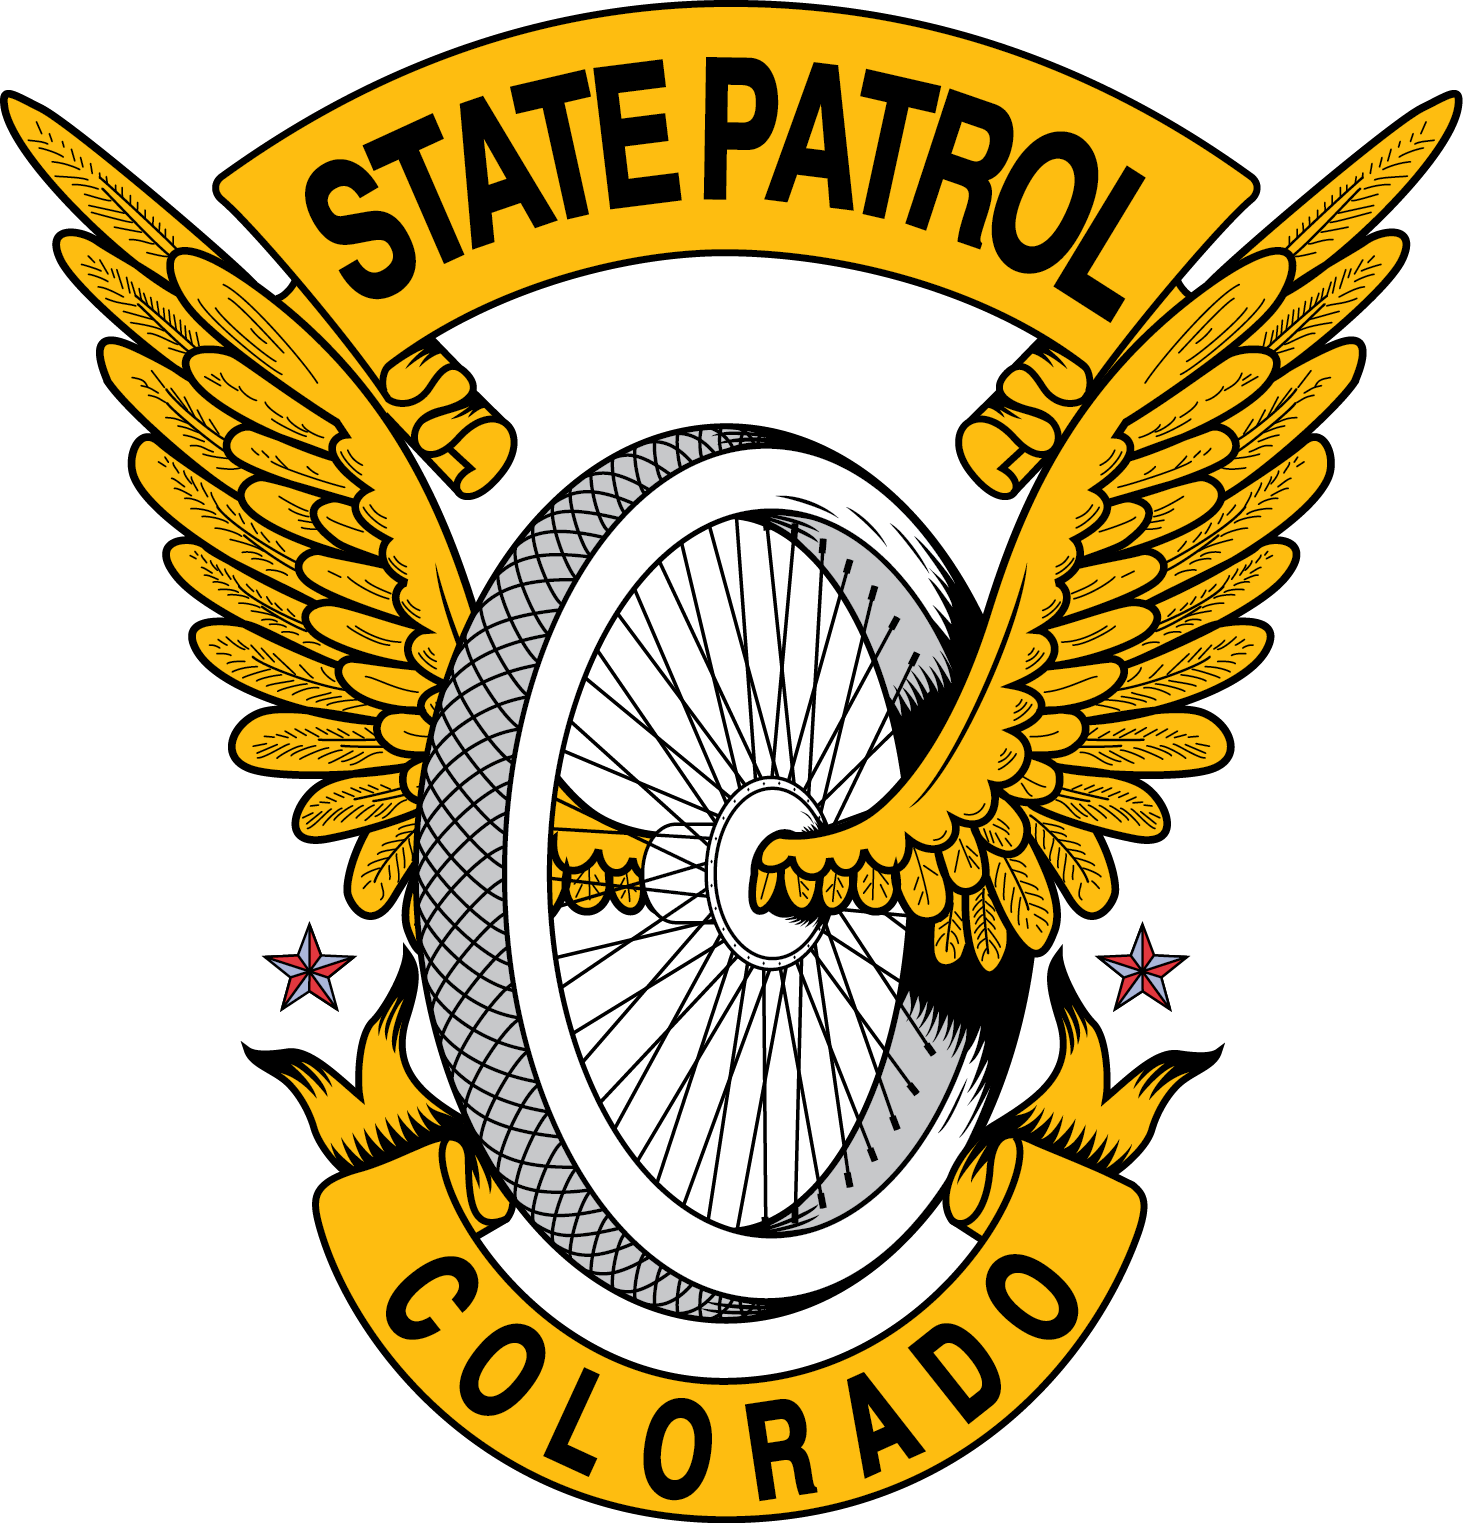 policeman clipart state trooper